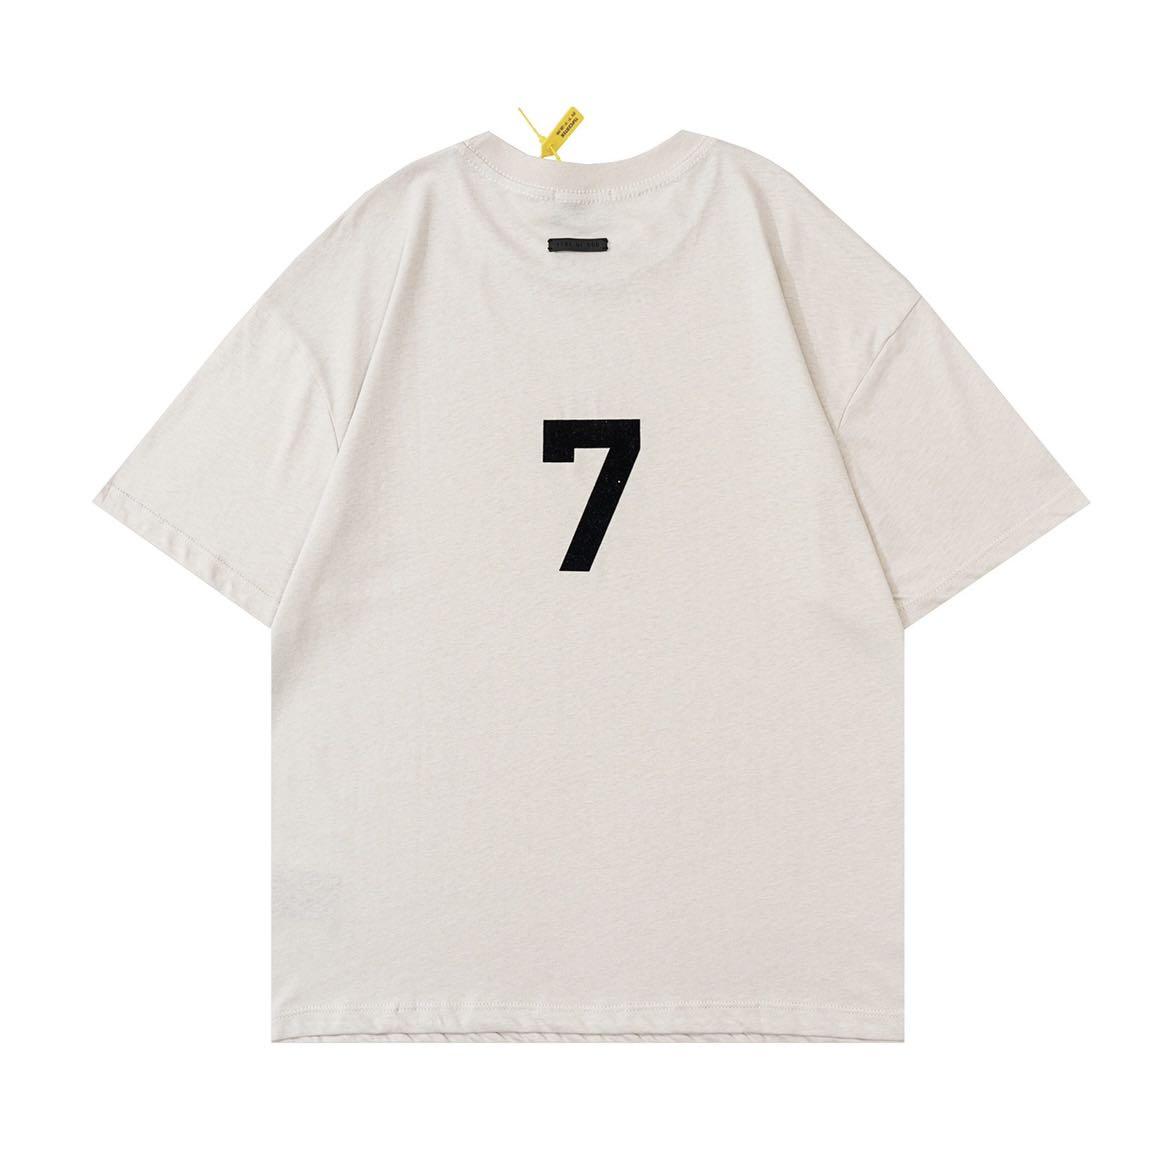 Fear Of God | Seventh Collection 7 Tee, Men's Fashion, Tops & Sets ...